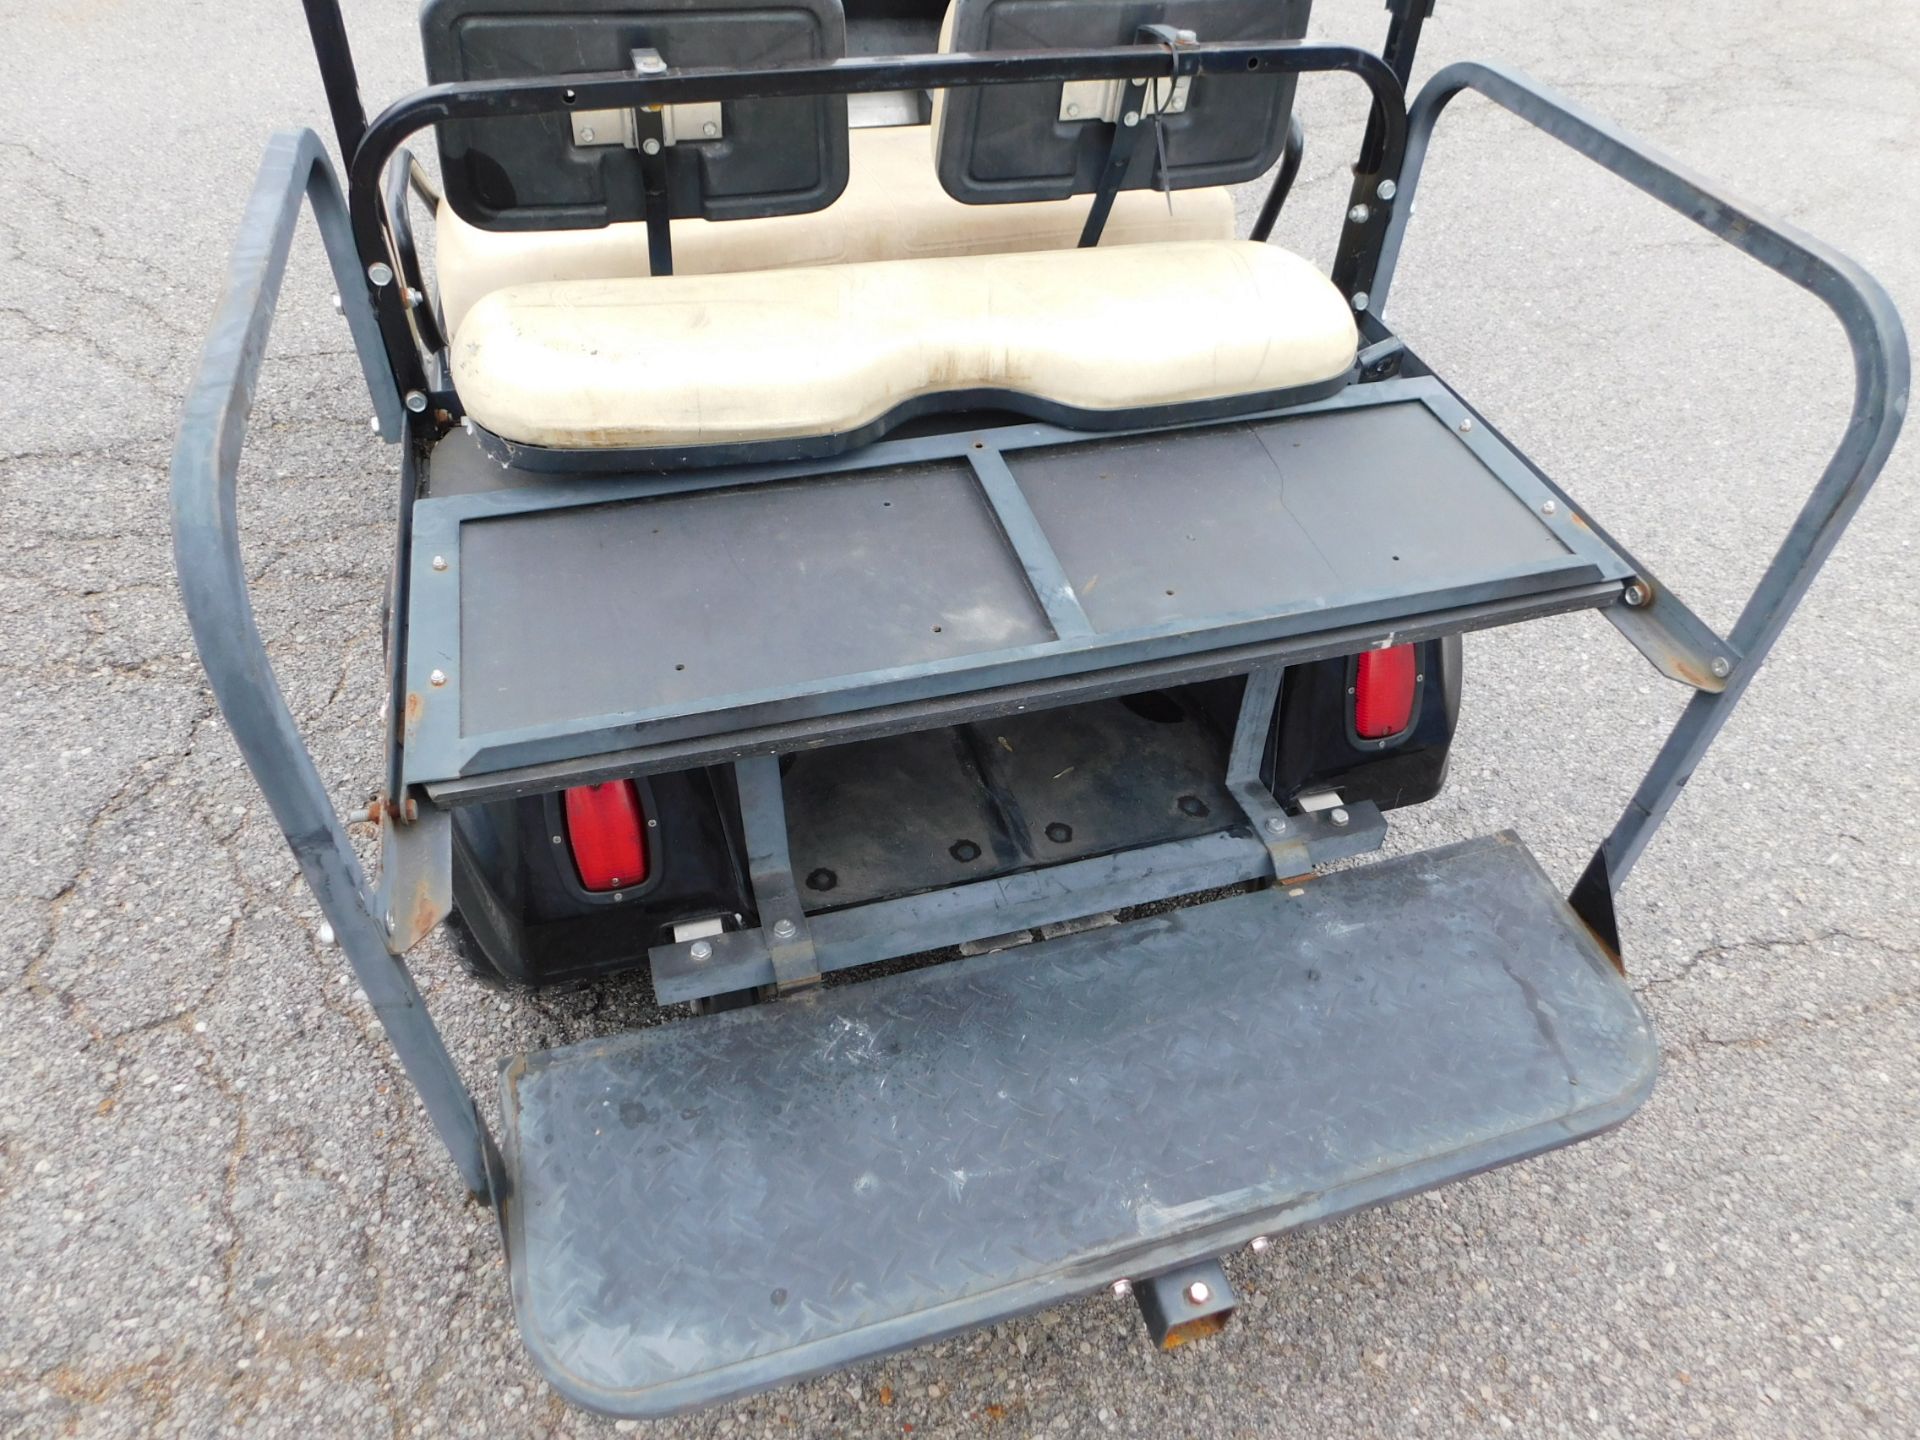 Club Car Gas-Powered Golf Cart, SN AG9924-769798, Canopy, Windshield, Fold-Out Back Bed - Image 15 of 16